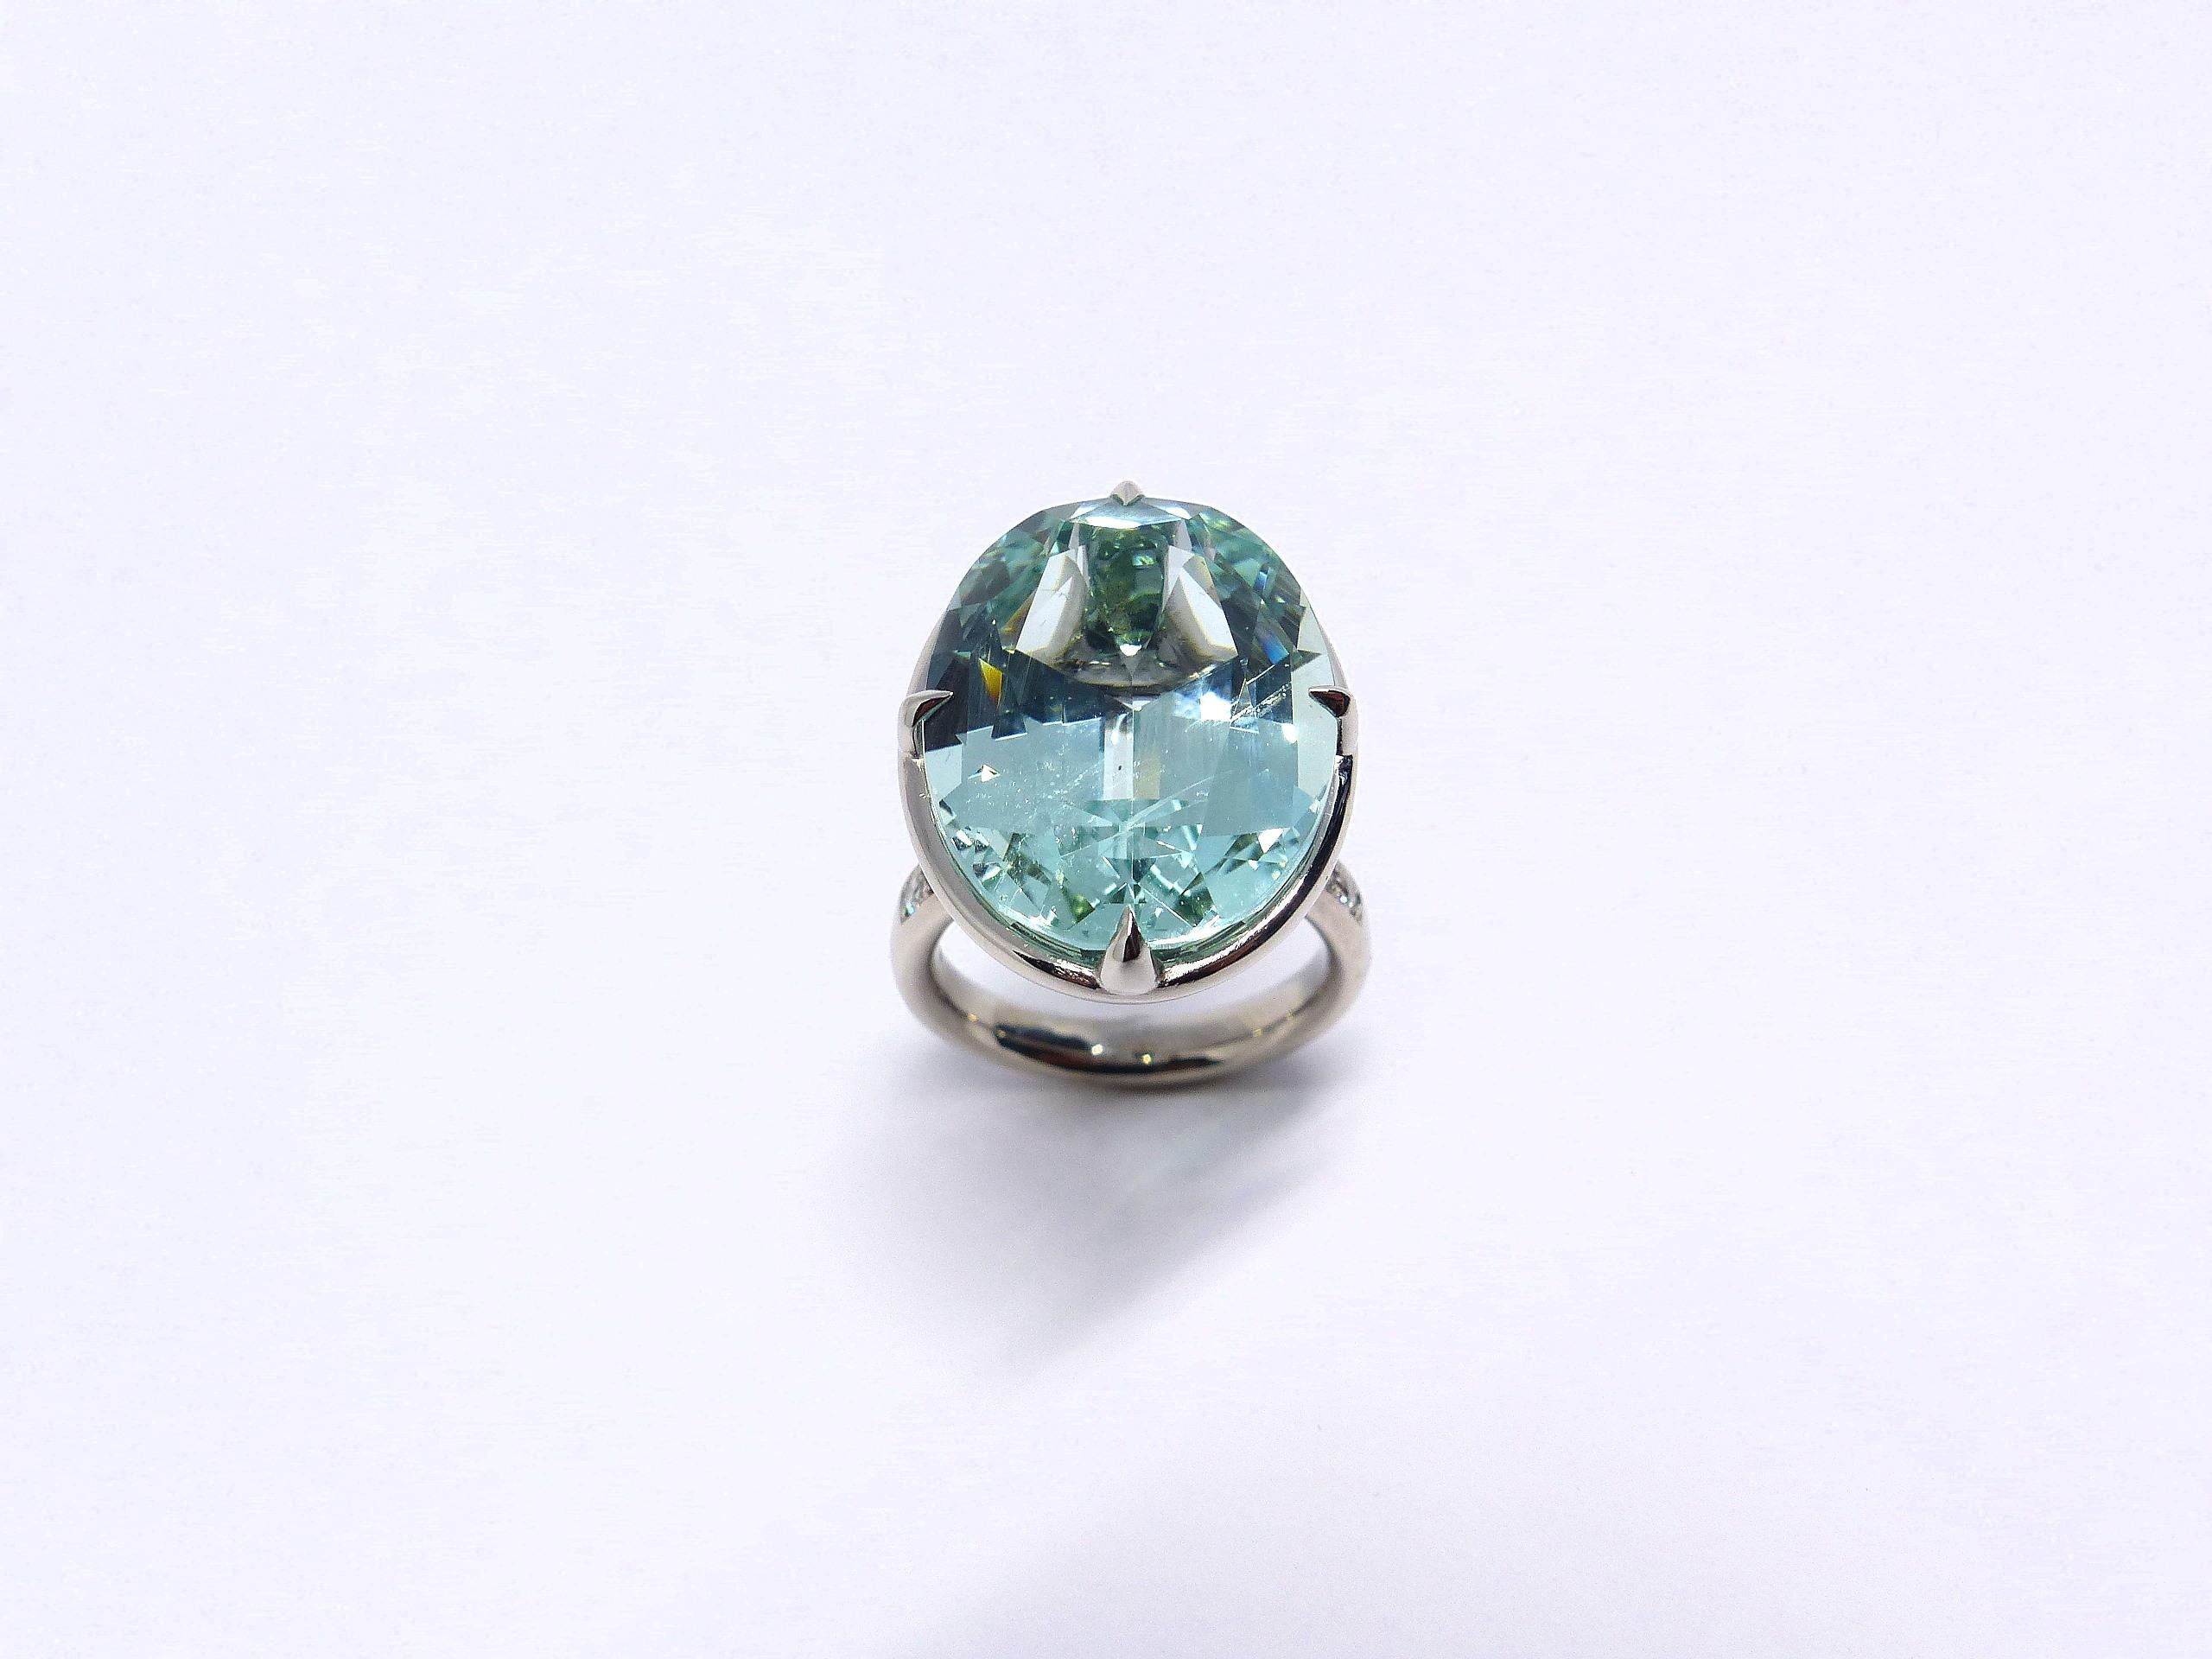 Thomas Leyser is renowned for his contemporary jewellery designs utilizing fine gemstones.

This 18k white gold ring is set with 1x fine green Beryl in magnificient blueish/greenish colour and large facettes (oval, 21x16mm, 19.53 carat) + 14x